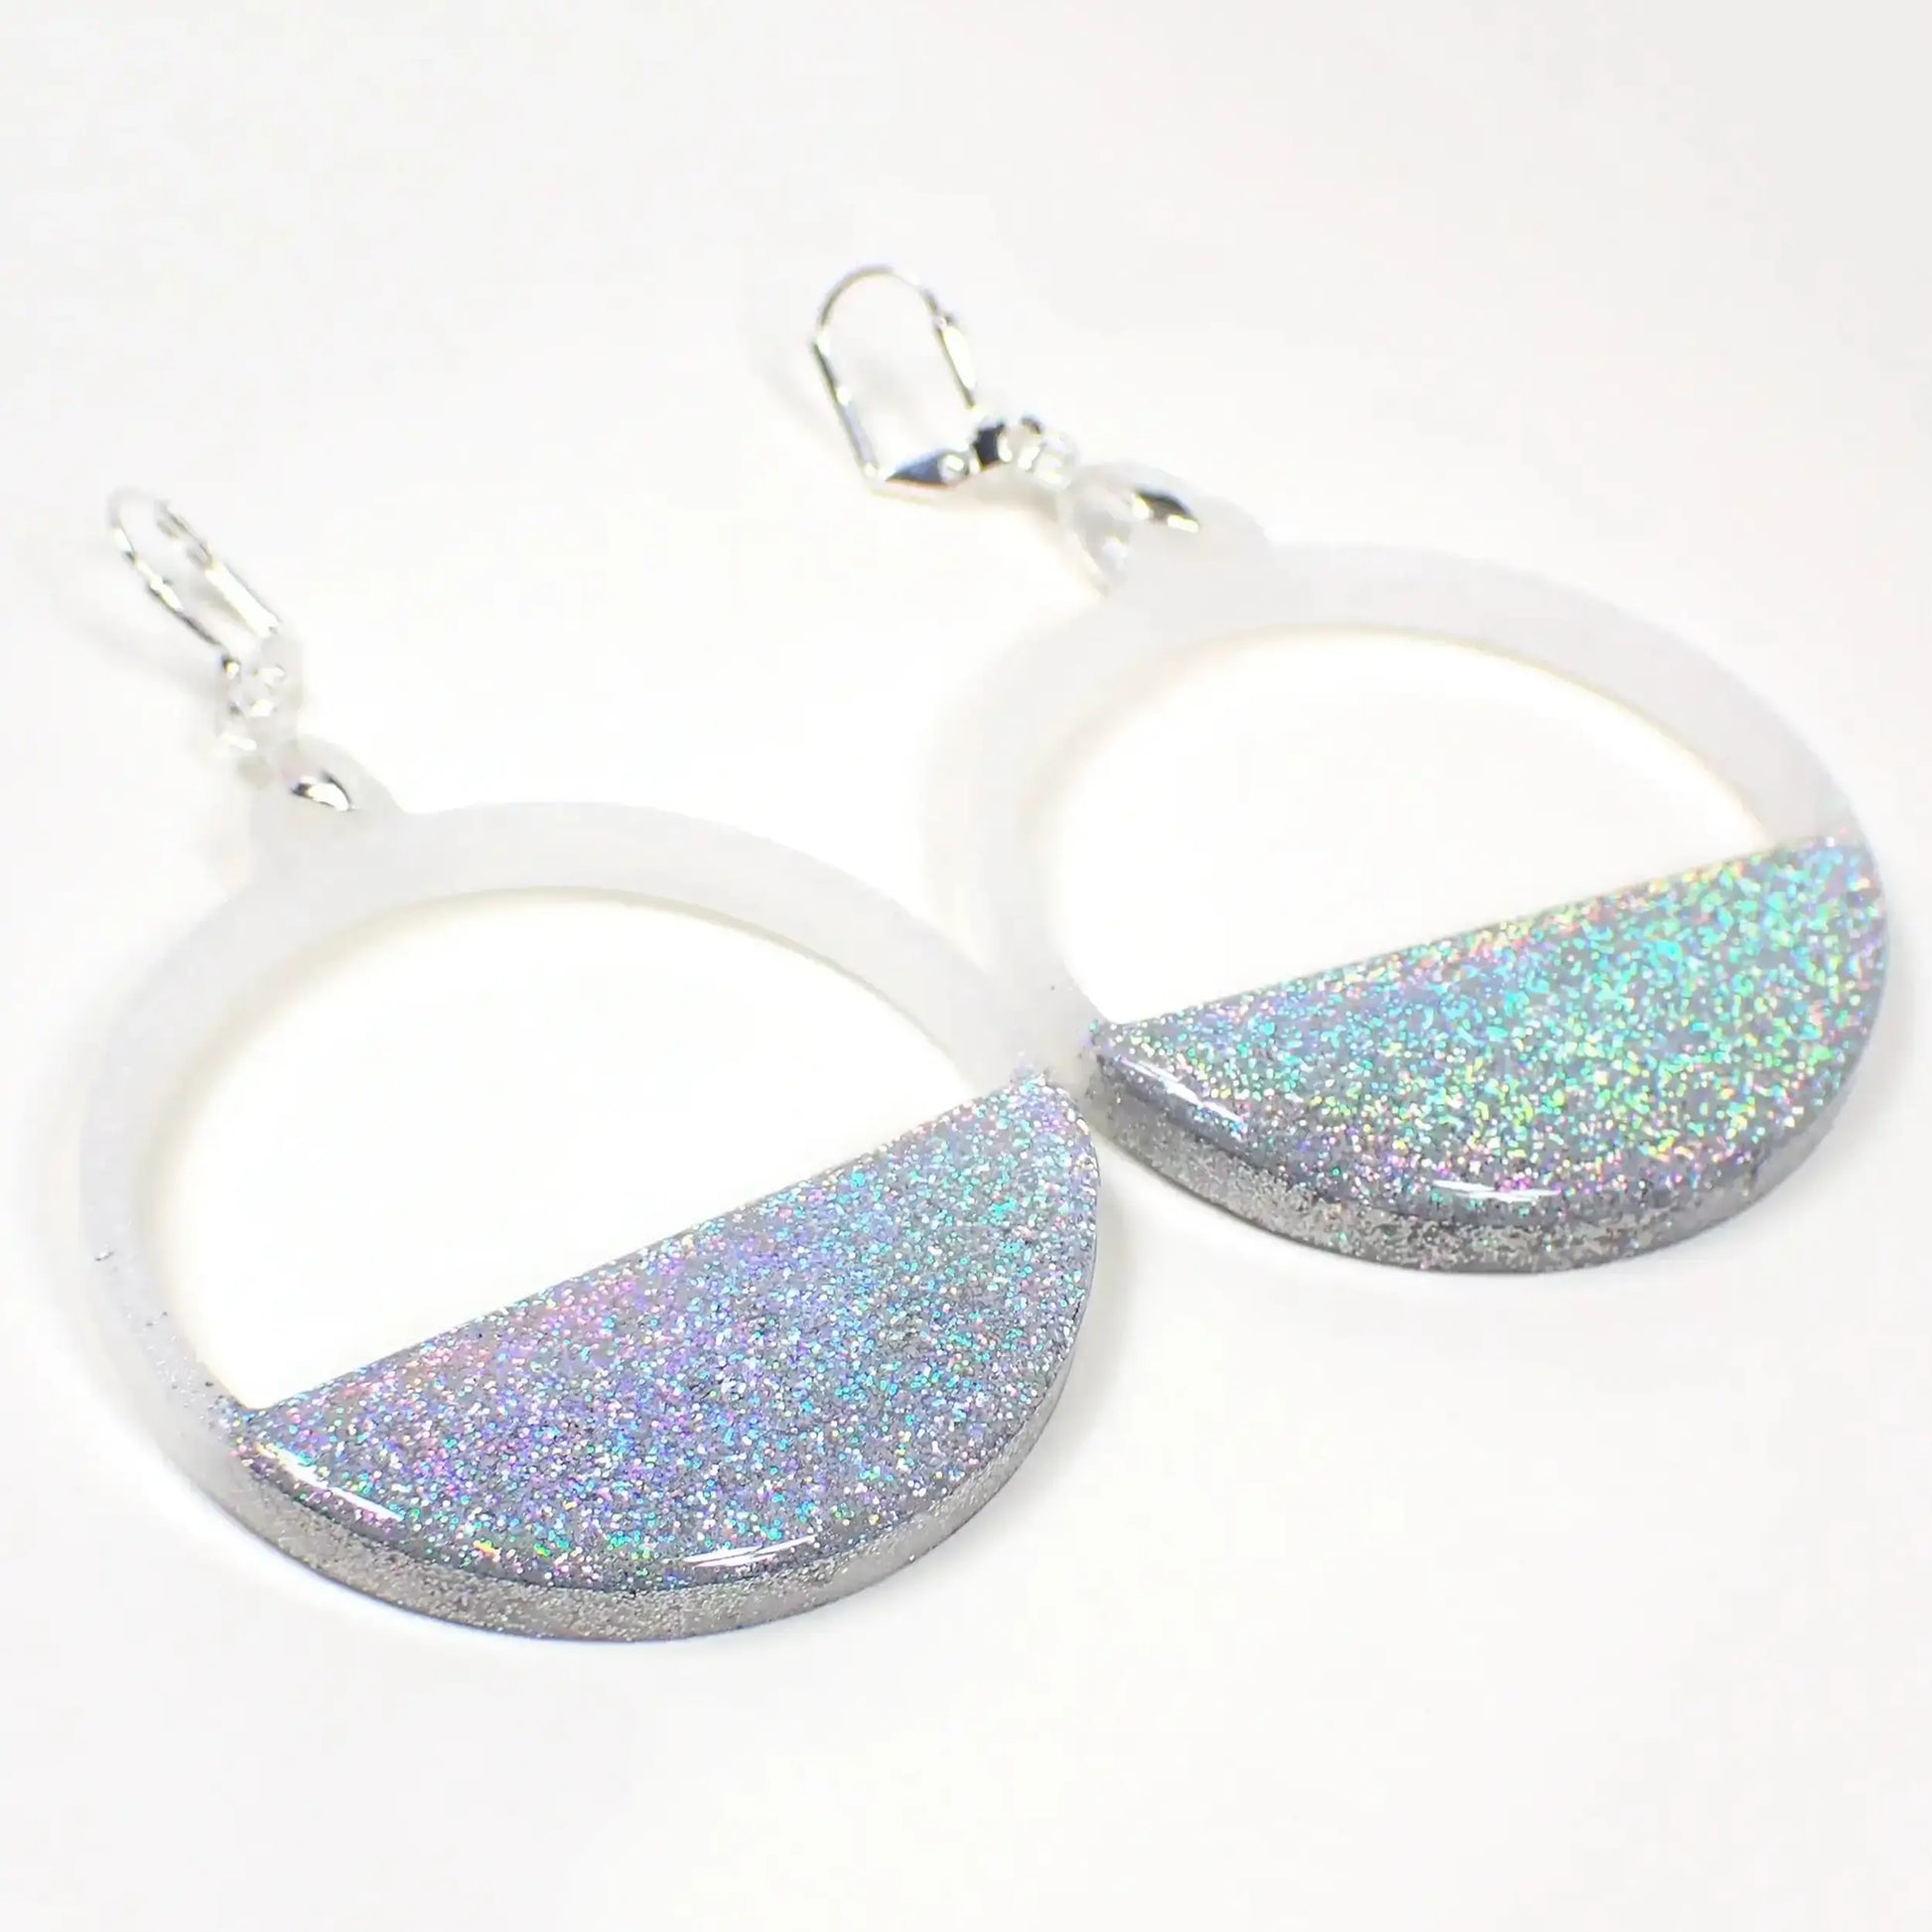 Angled front view of the handmade resin hoop earrings. The metal is silver tone plated in color. They are round hoop shaped with an open top and a semi circle bottom. The top part is pearly white in color. The bottom has silver holographic glitter embedded in it which has sparkle and flashes of different colors.